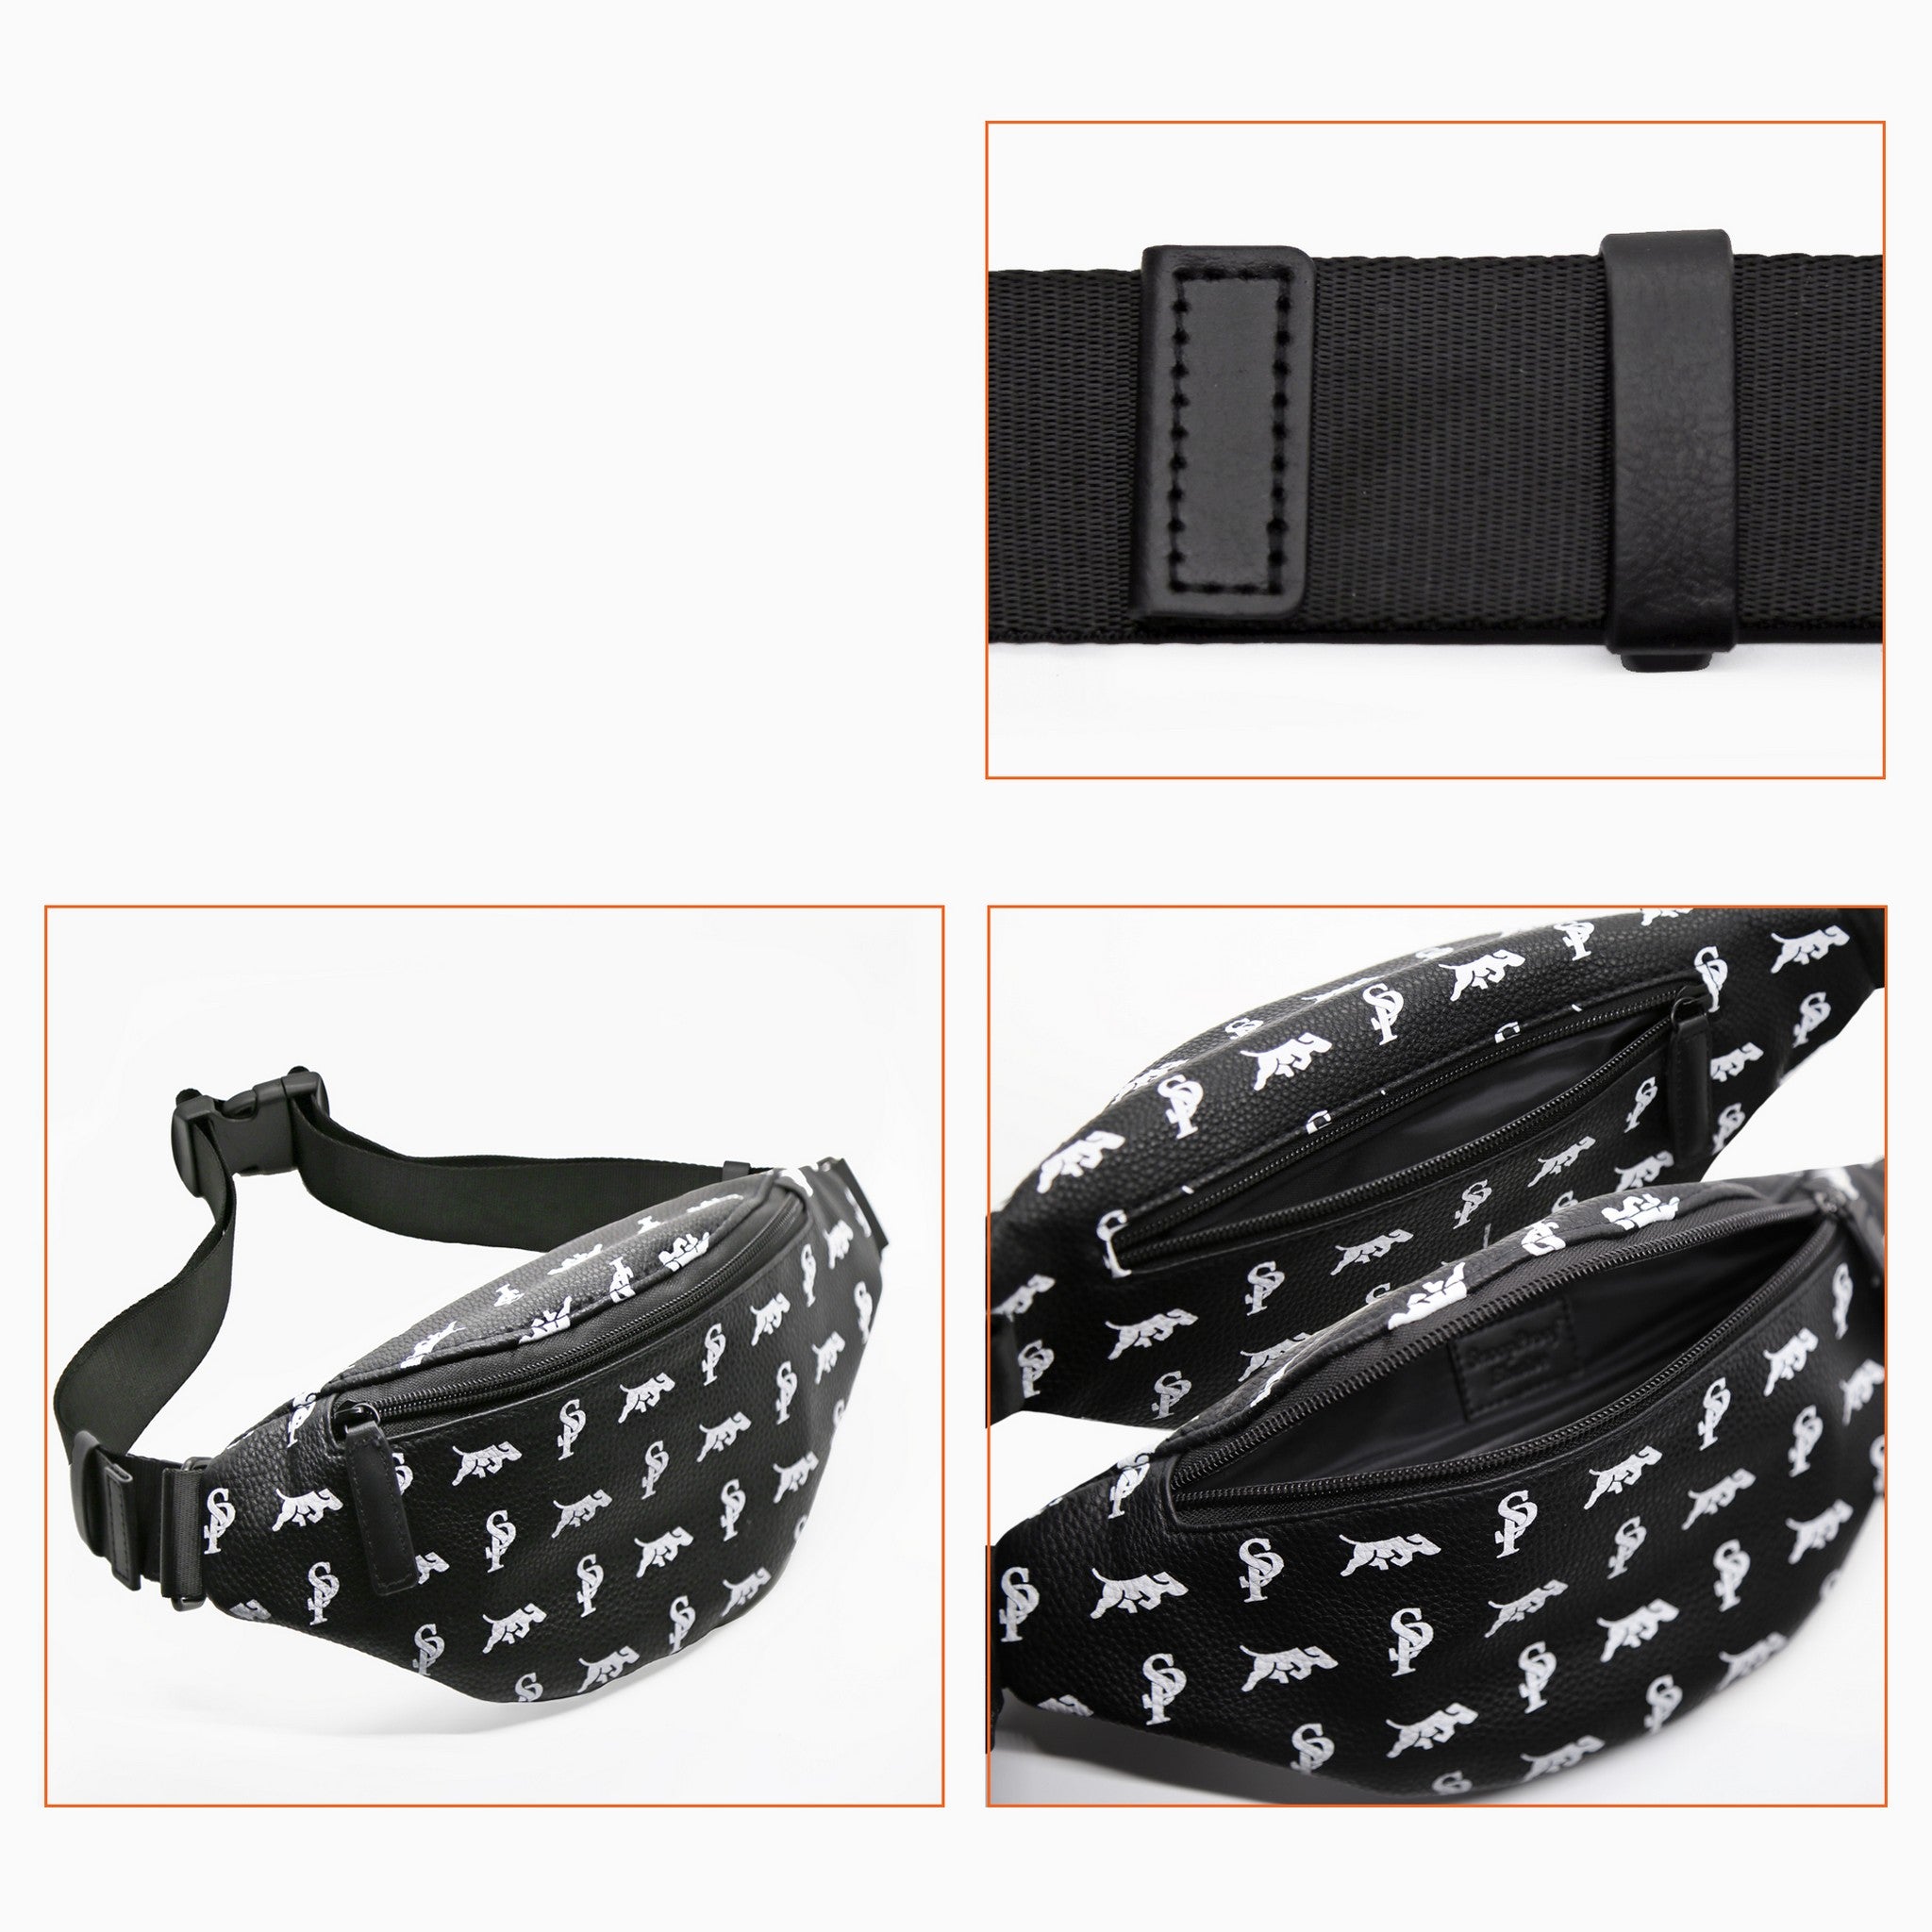 Elusive 1.0 in Black & White - Smell Proof Belt Bag-Fanny Pack-Snoopproofbags